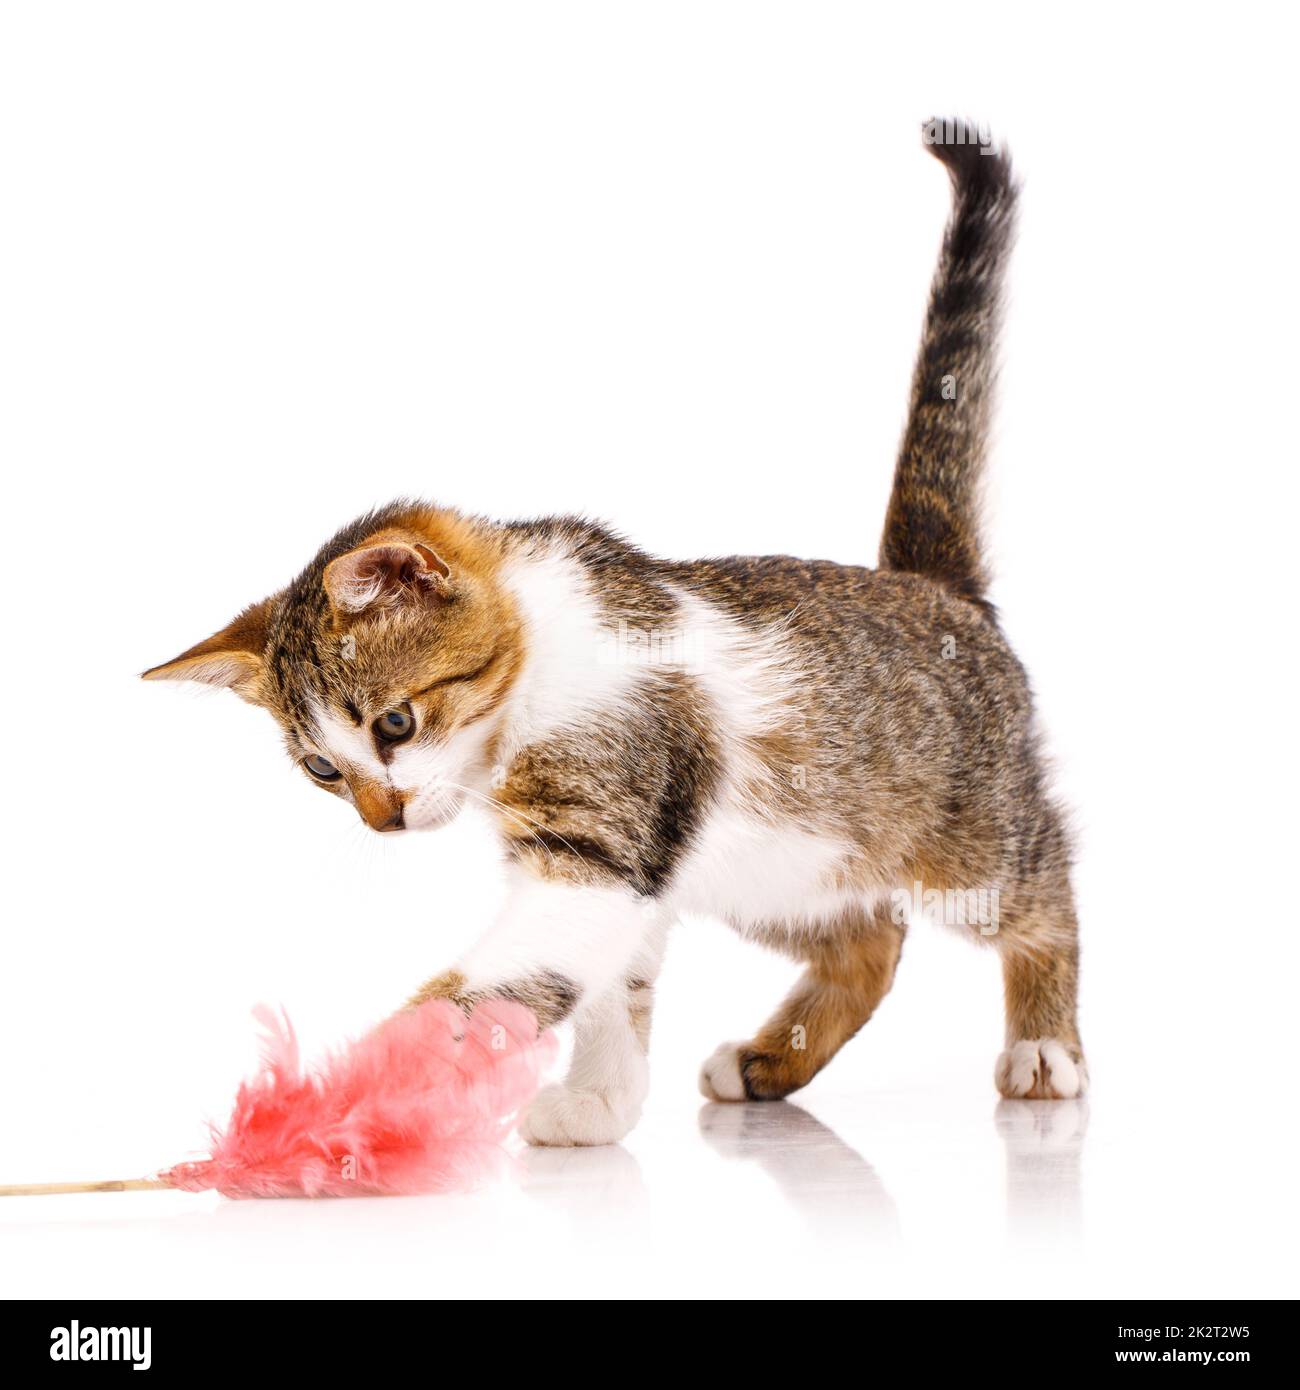 Domestic kitten stands on a white background and focused catches the paw of a pink toy. Stock Photo